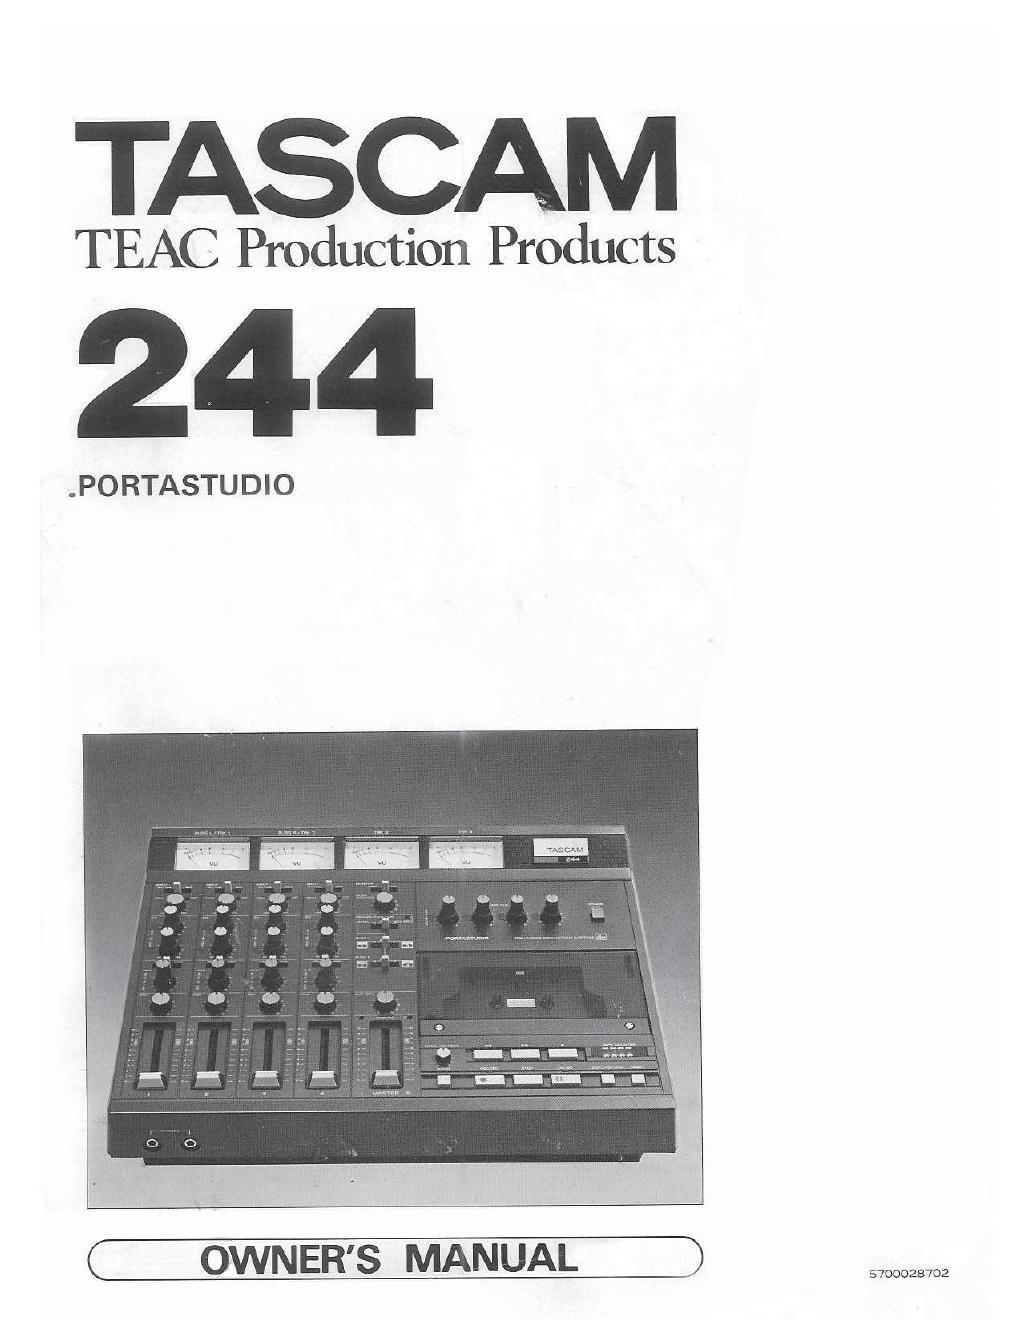 tascam 244 owners manual